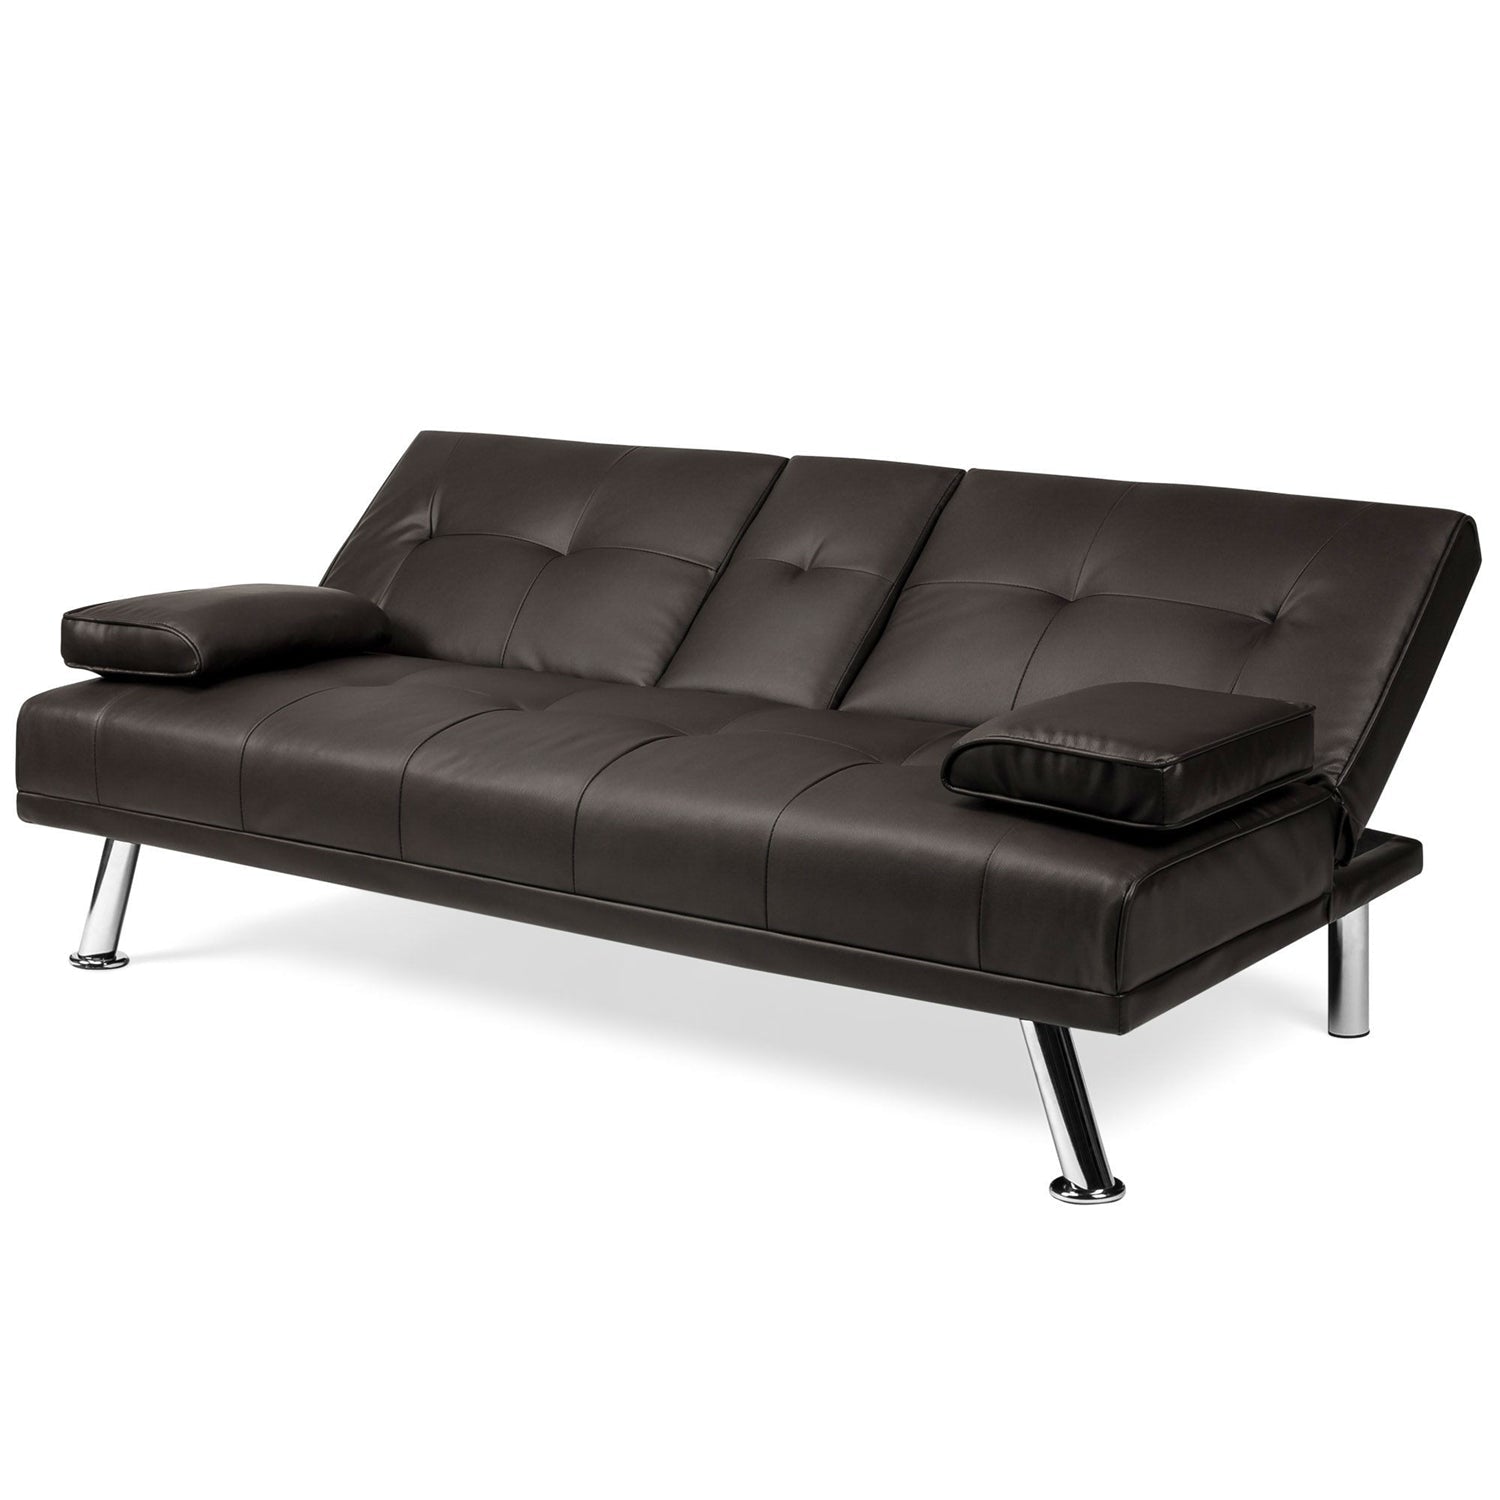 Living Room > Sofas - Brown Faux Leather Convertible Sofa Futon With 2 Cup Holders